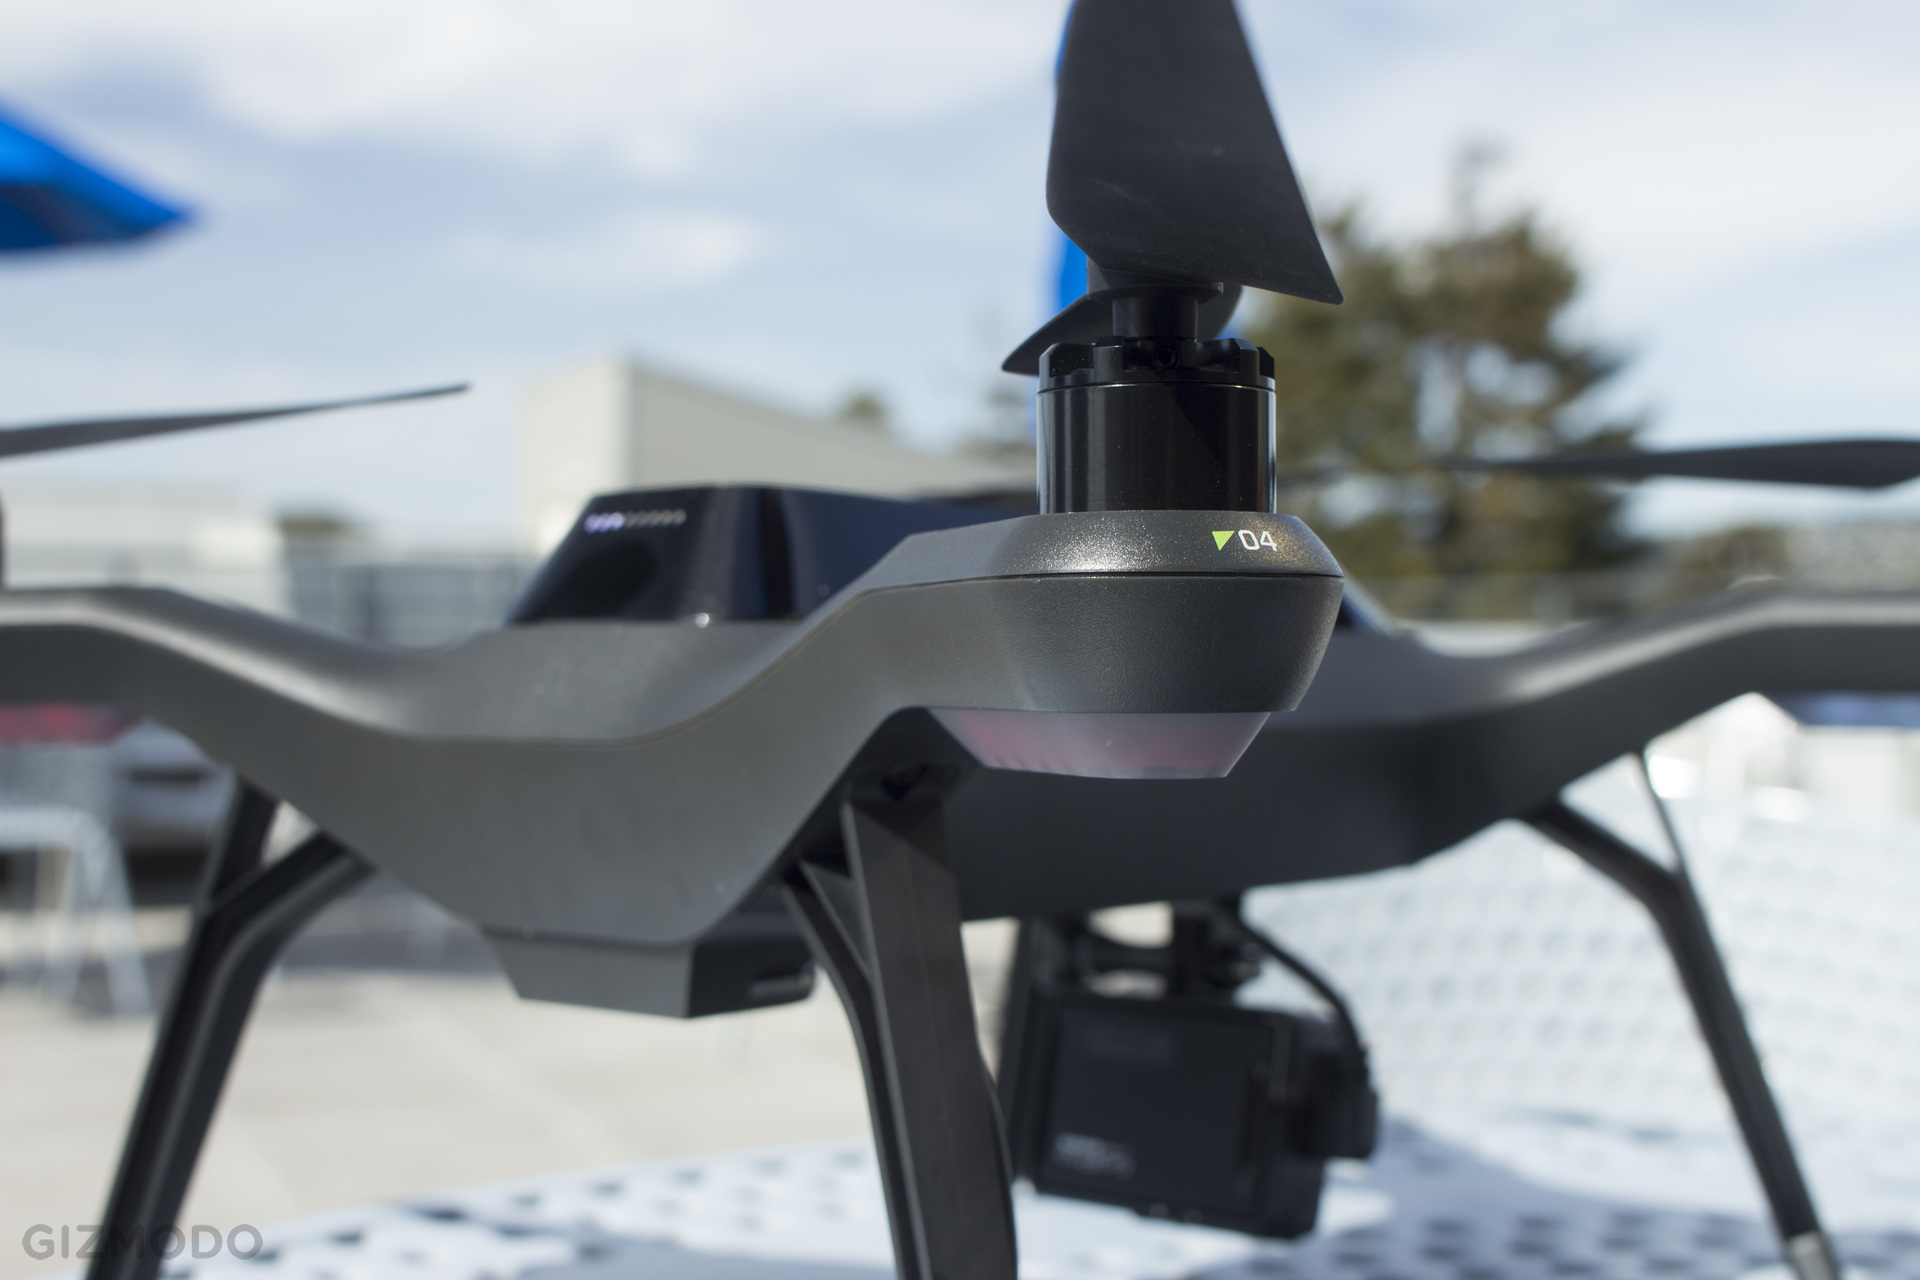 3DR’s New Solo Drone Promises Airborne Footage Without A Learning Curve